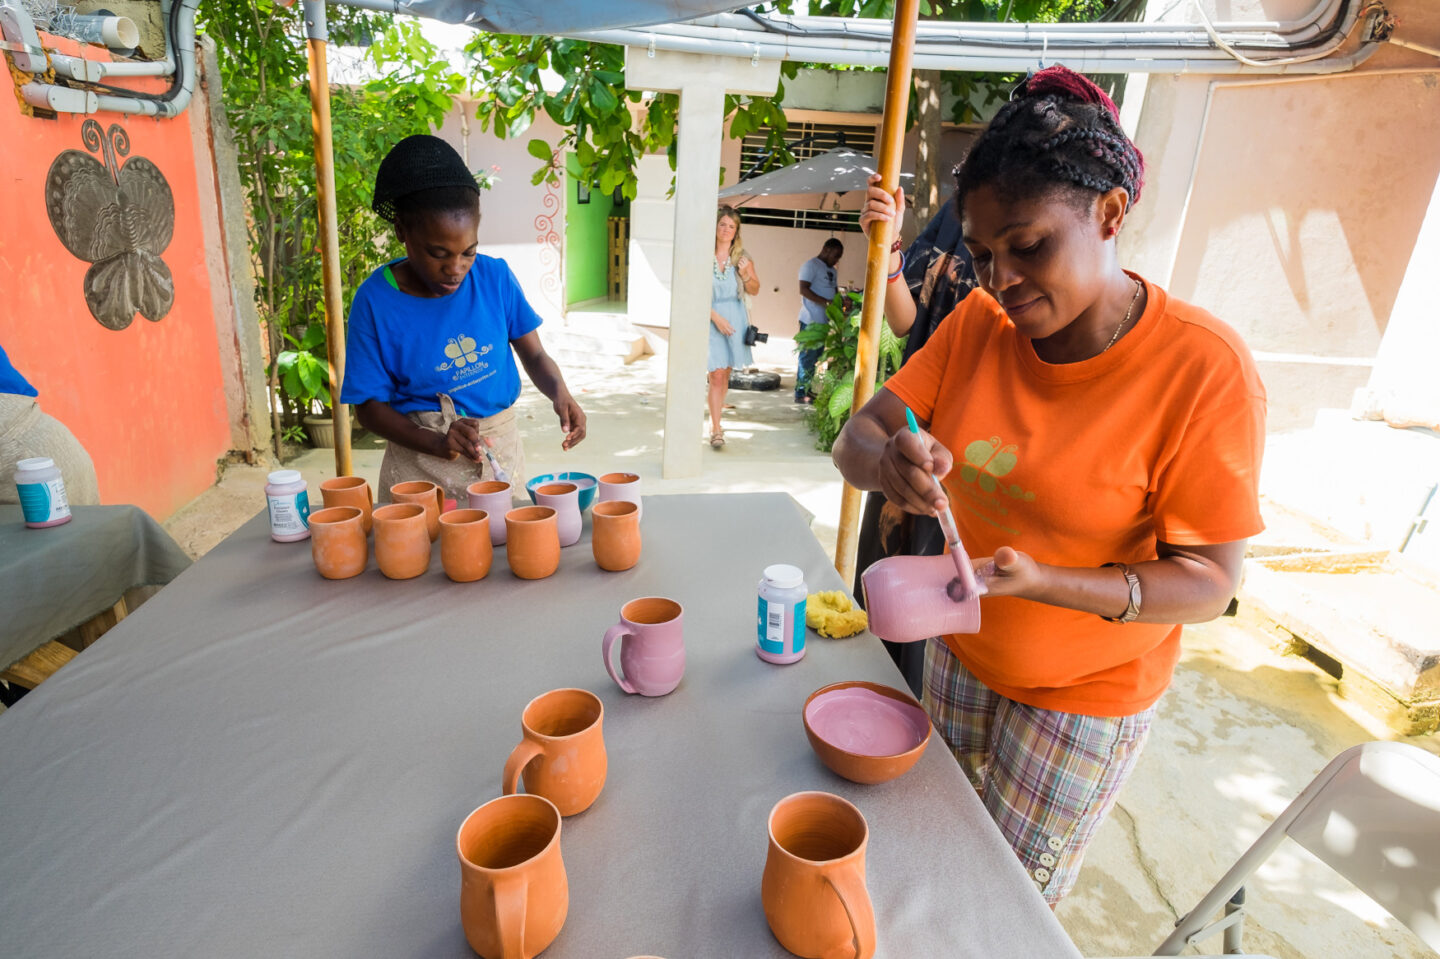 Two individuals paint pieces of pottery